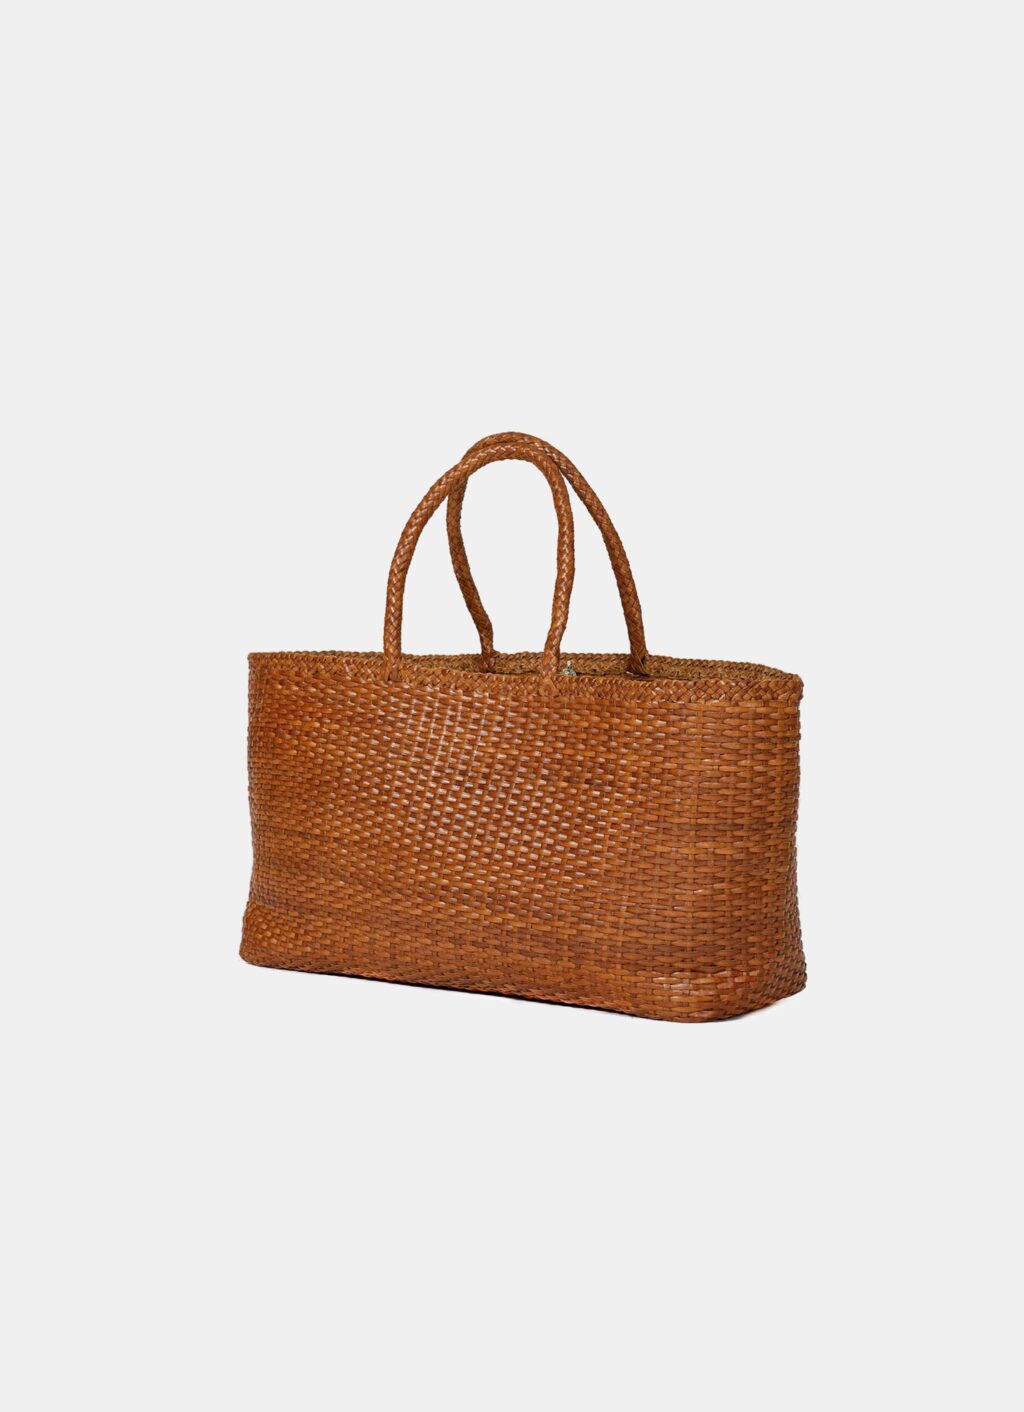 Dragon Diffusion - Handwoven Leather Basket - Weave Tote - Tan